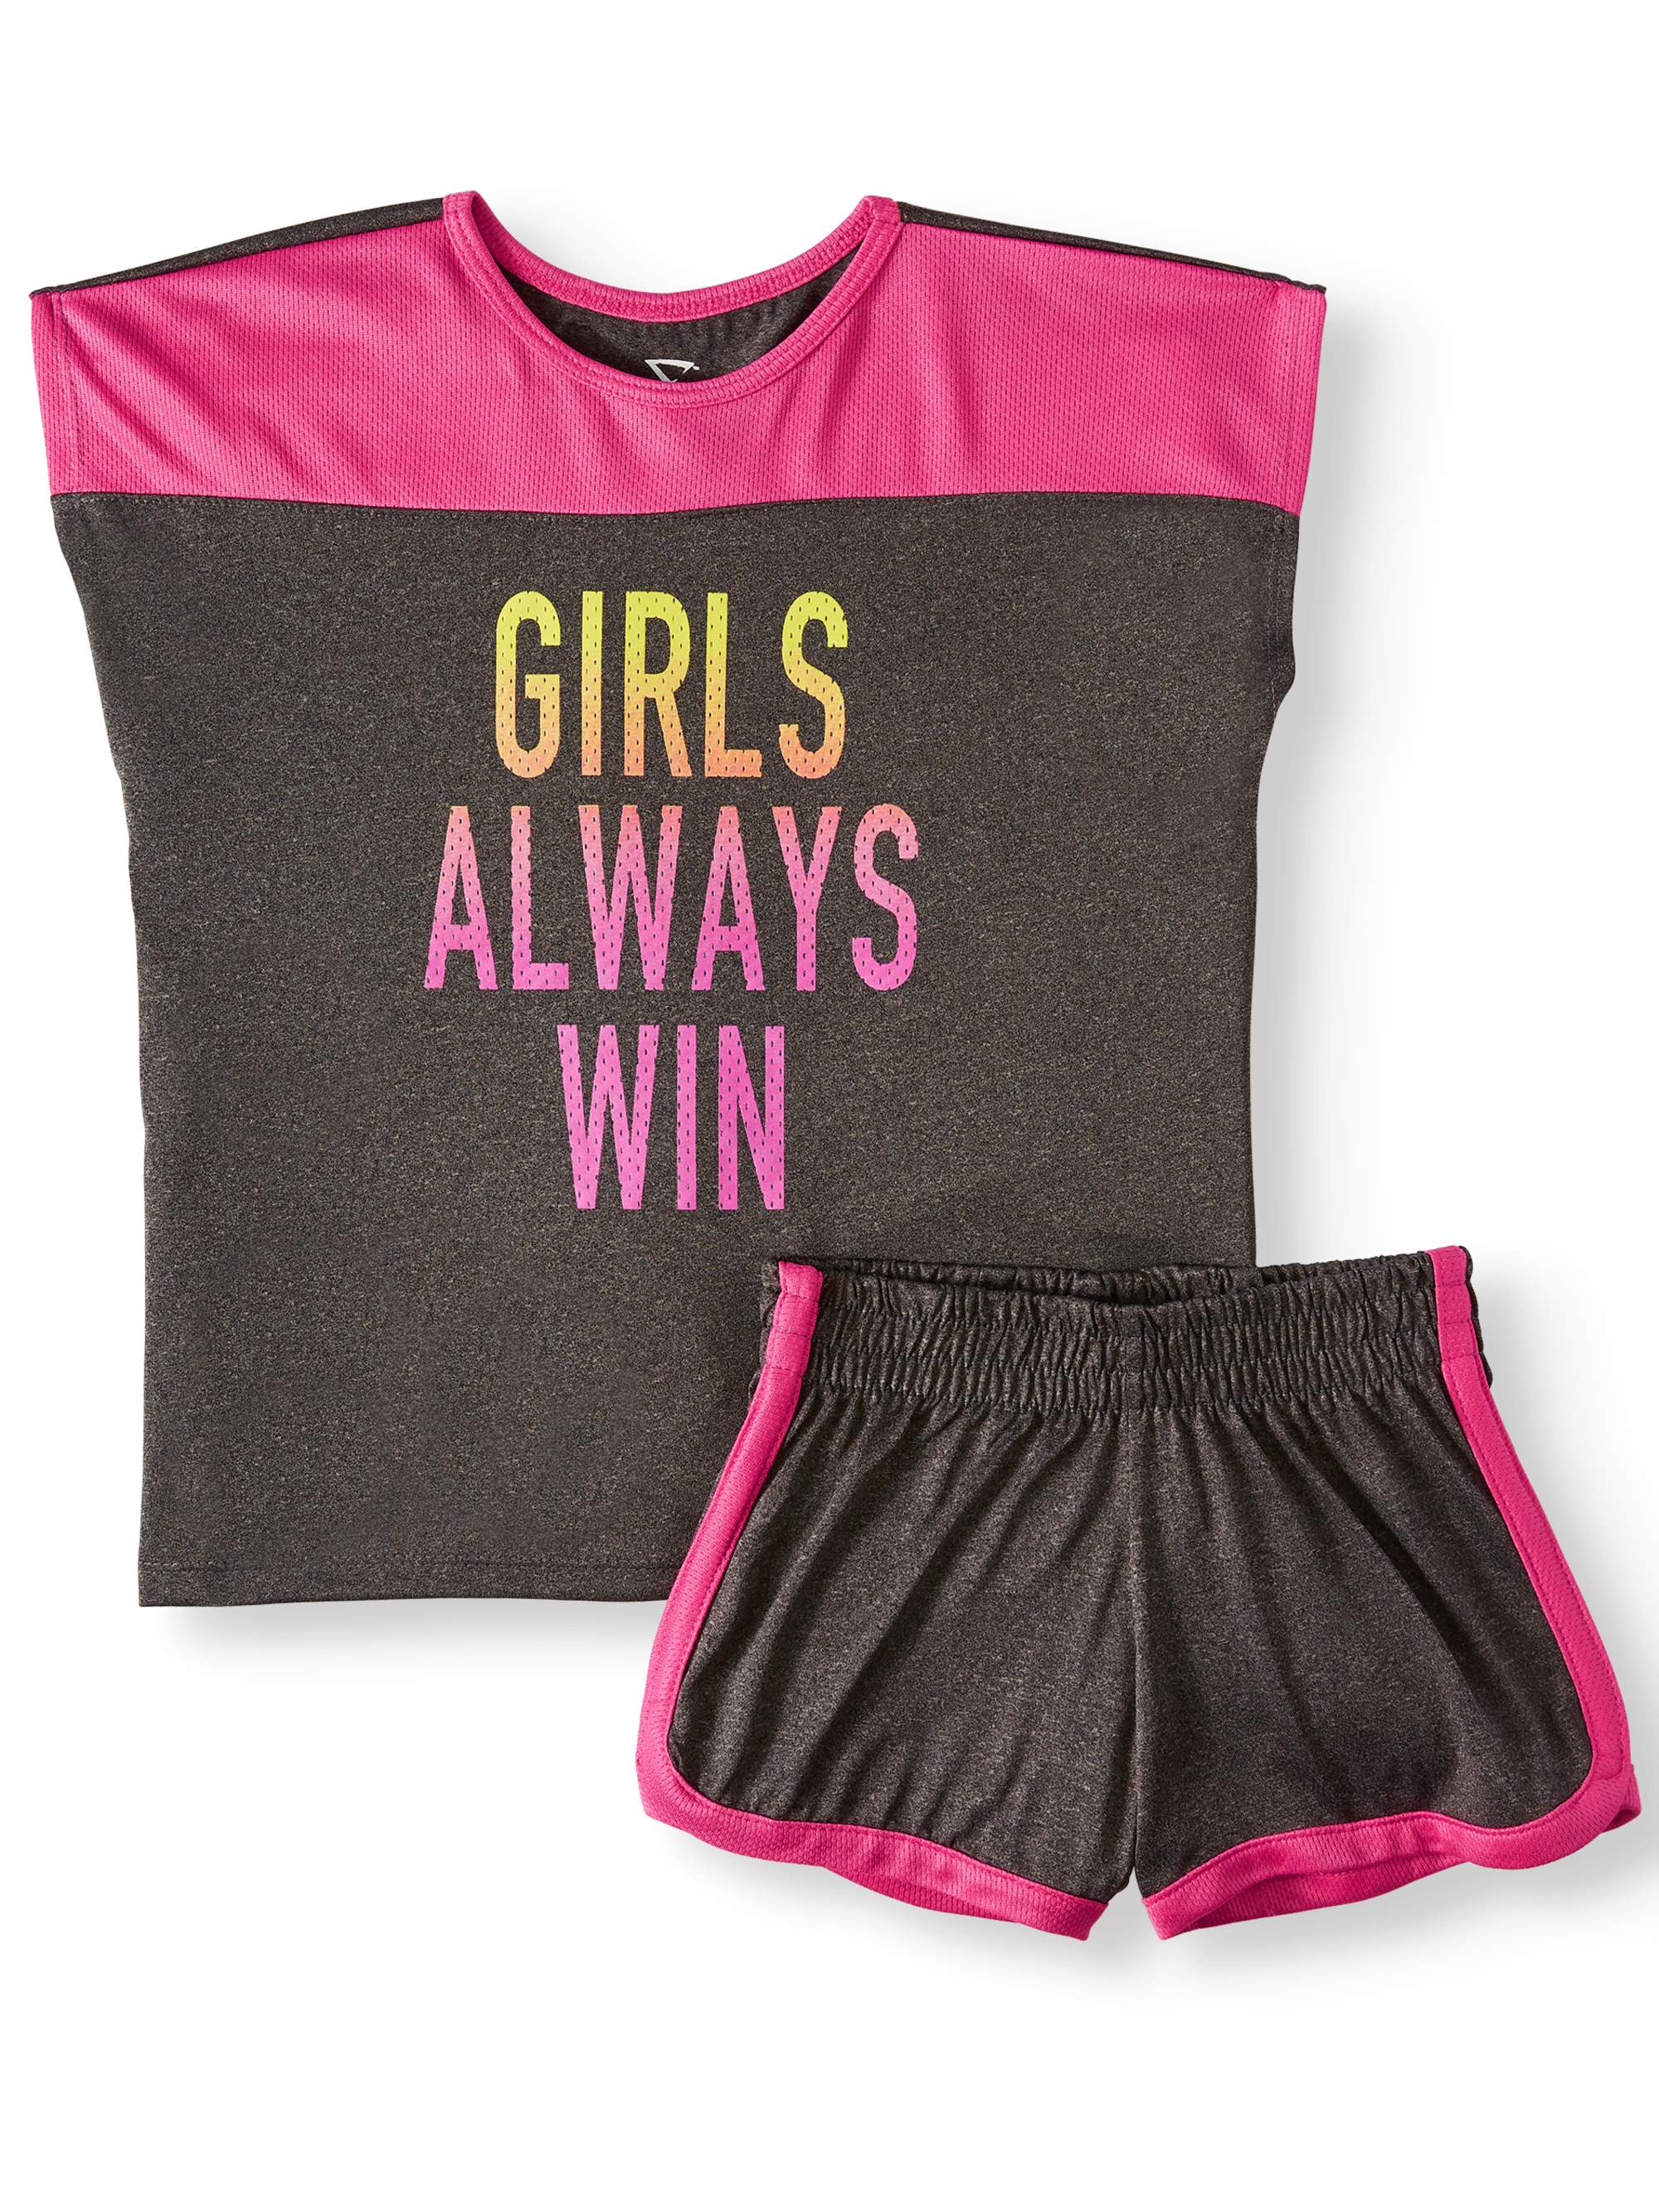 Cheetah Graphic Colorblock Mesh Trim Top and Short, 2-Piece Active Set (Little Girls & Big Girls) - image 1 of 3